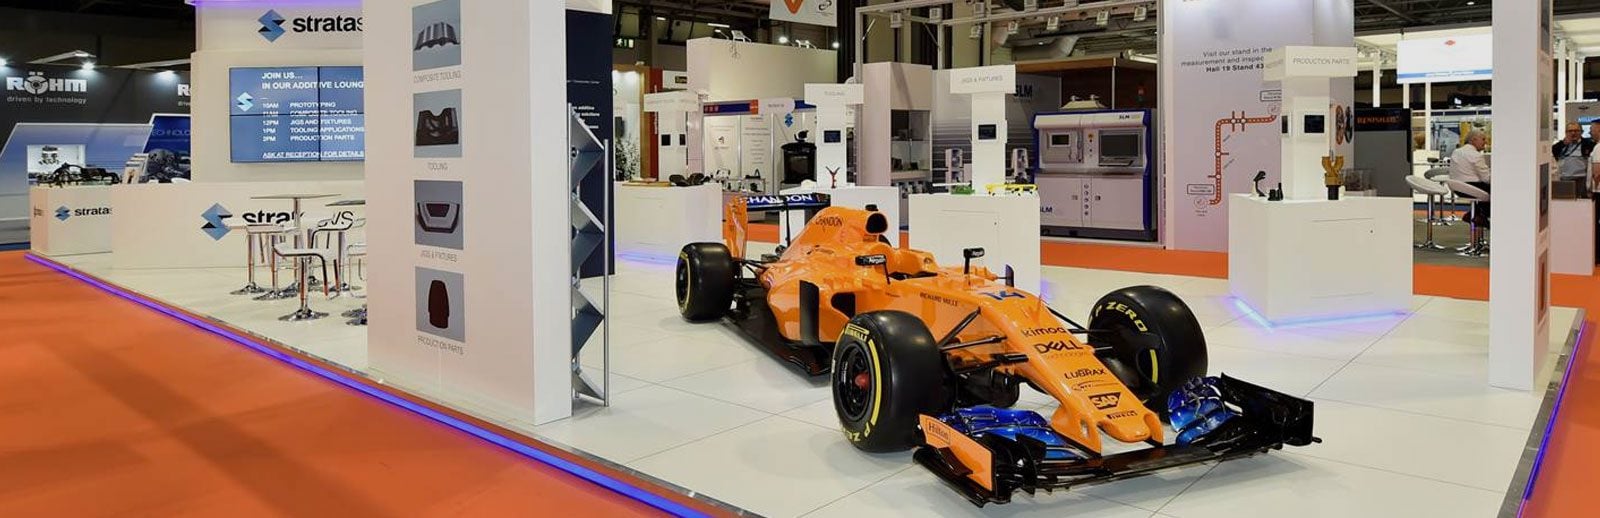 Stratasys exhibition stand with race car